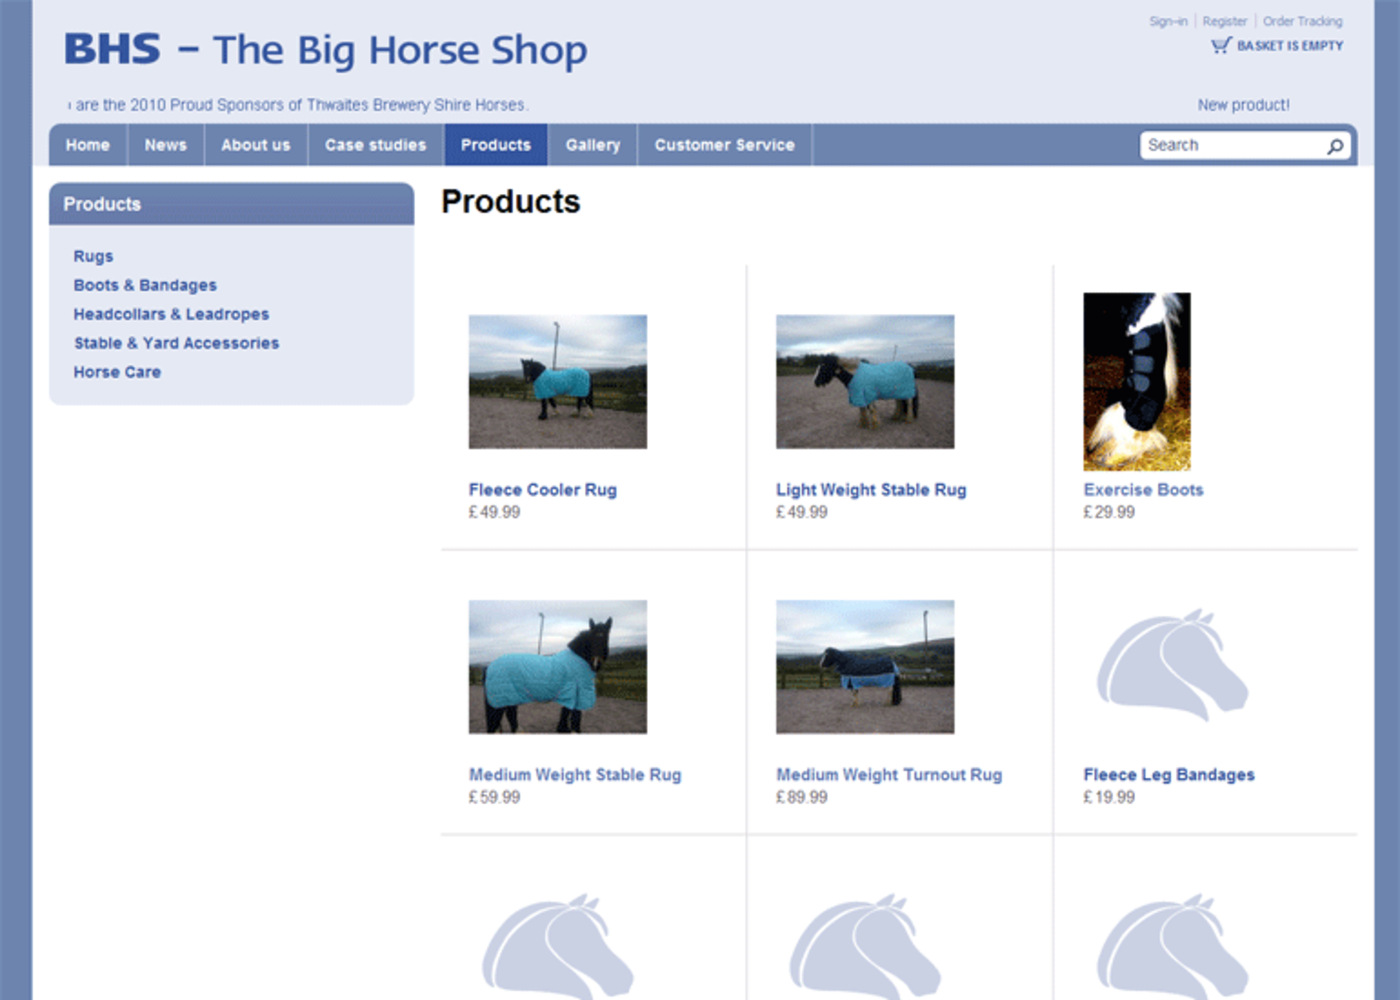 The Big Horse Shop (2009) Products